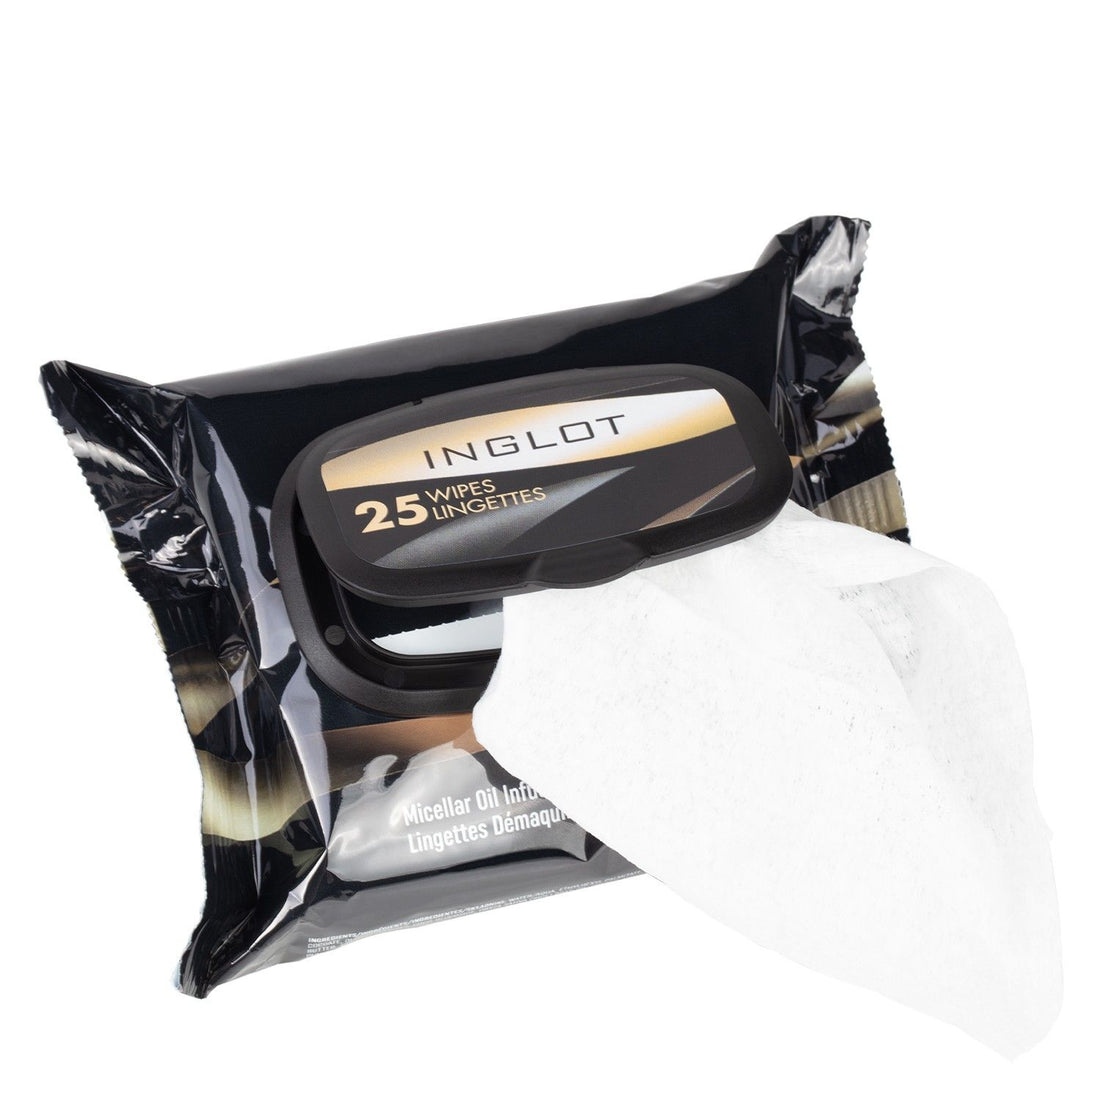 Micellair Oil Infused Makeup Remover Wipes - Inglot Cosmetics